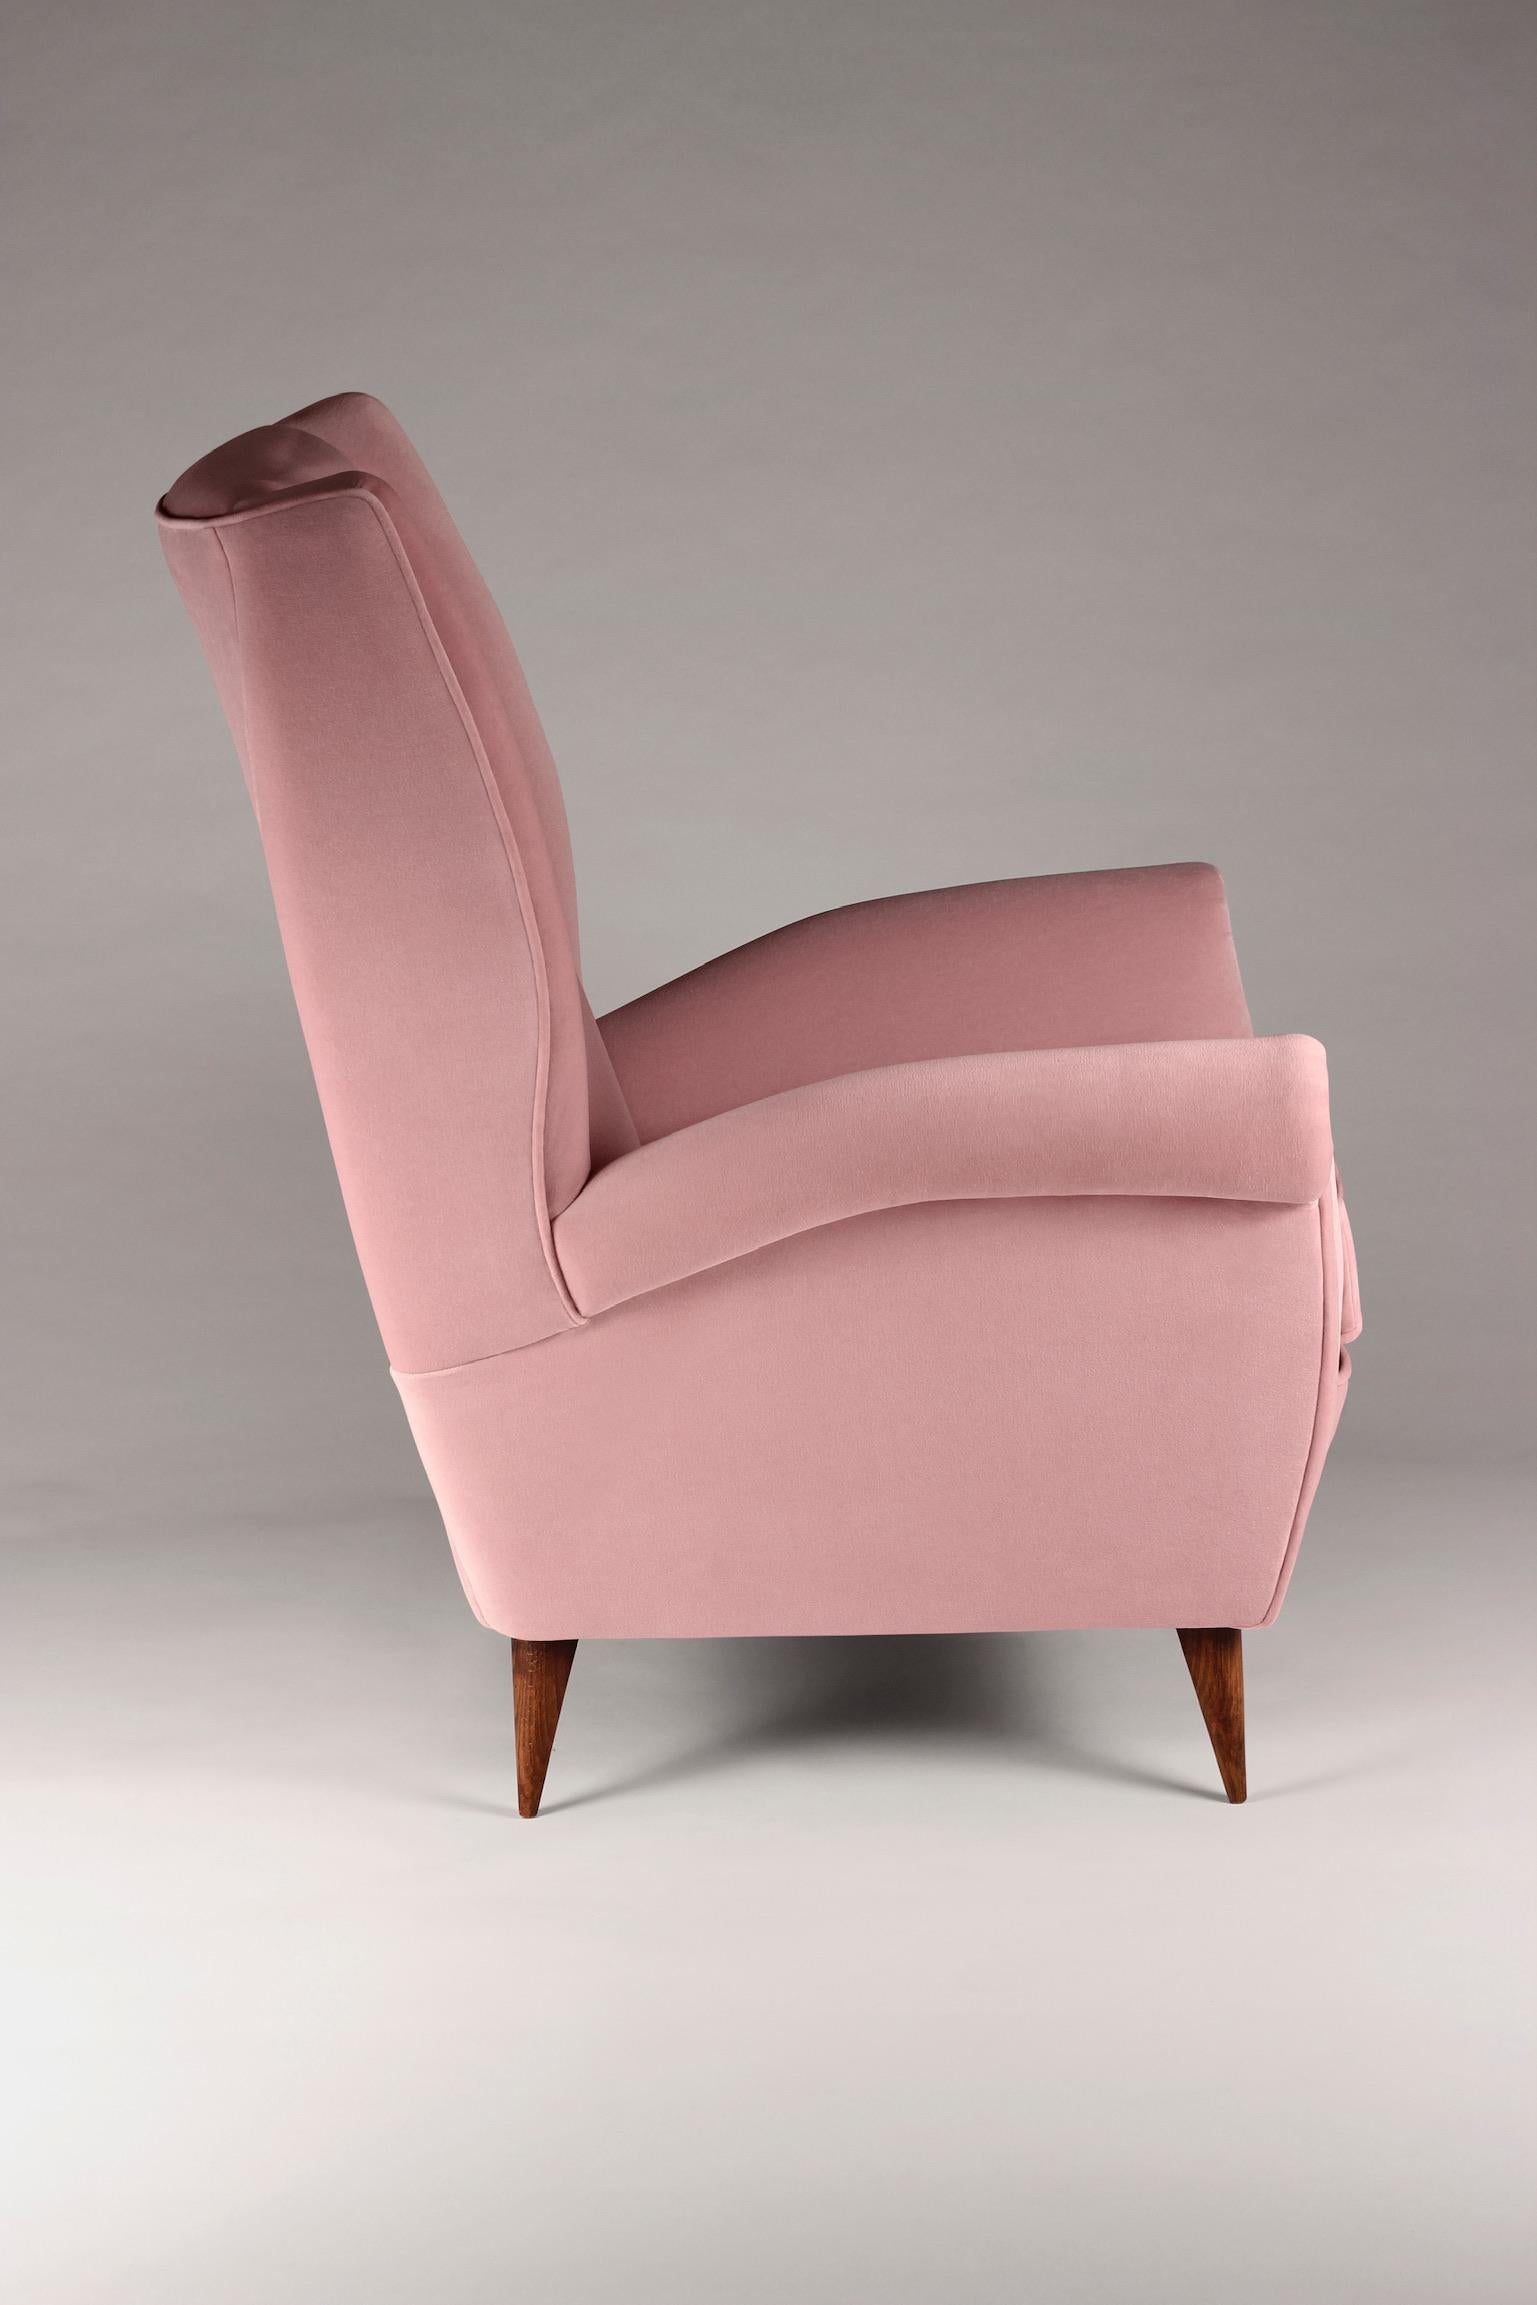 The high back lounge chair ‘Marcello’ was inspired by stylish Italian Design from the 1950s and is now created by English craftsman for the 21st century. We developed a Lounge chair with the option of producing any number to your fabric